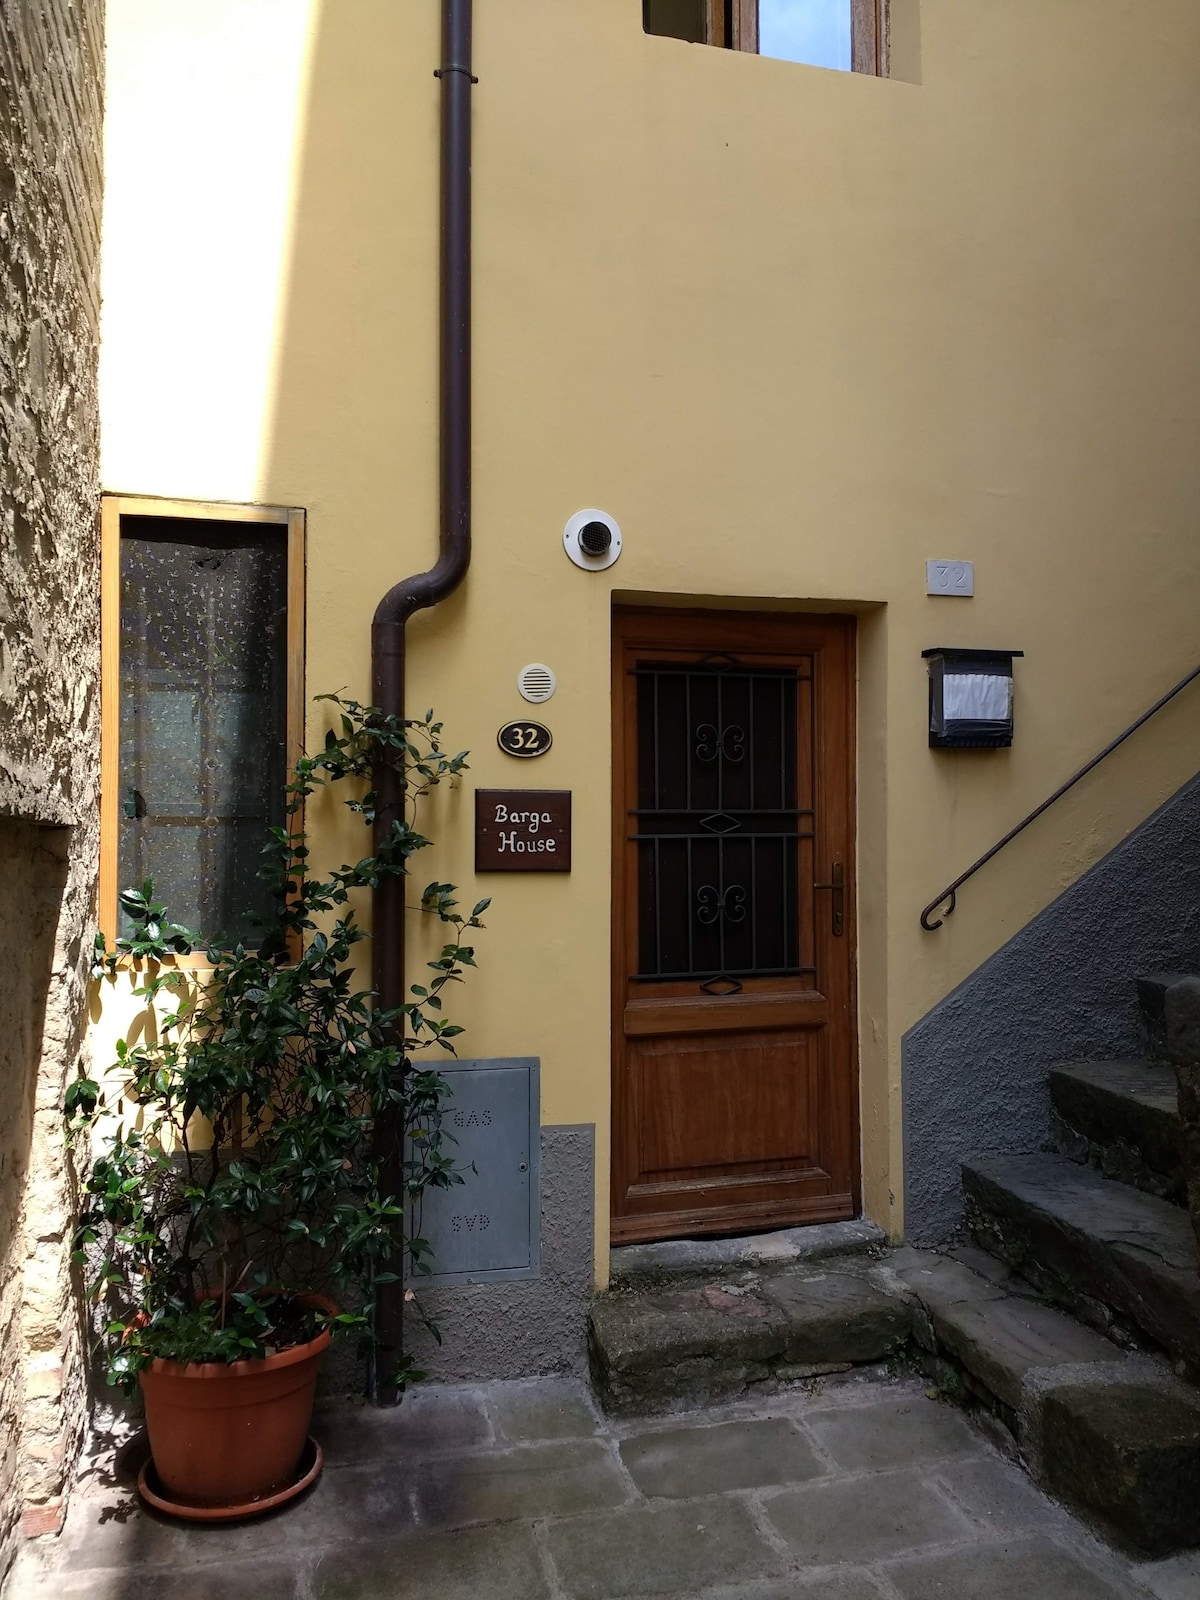 Two bed rustic town house in Barga, Tuscany